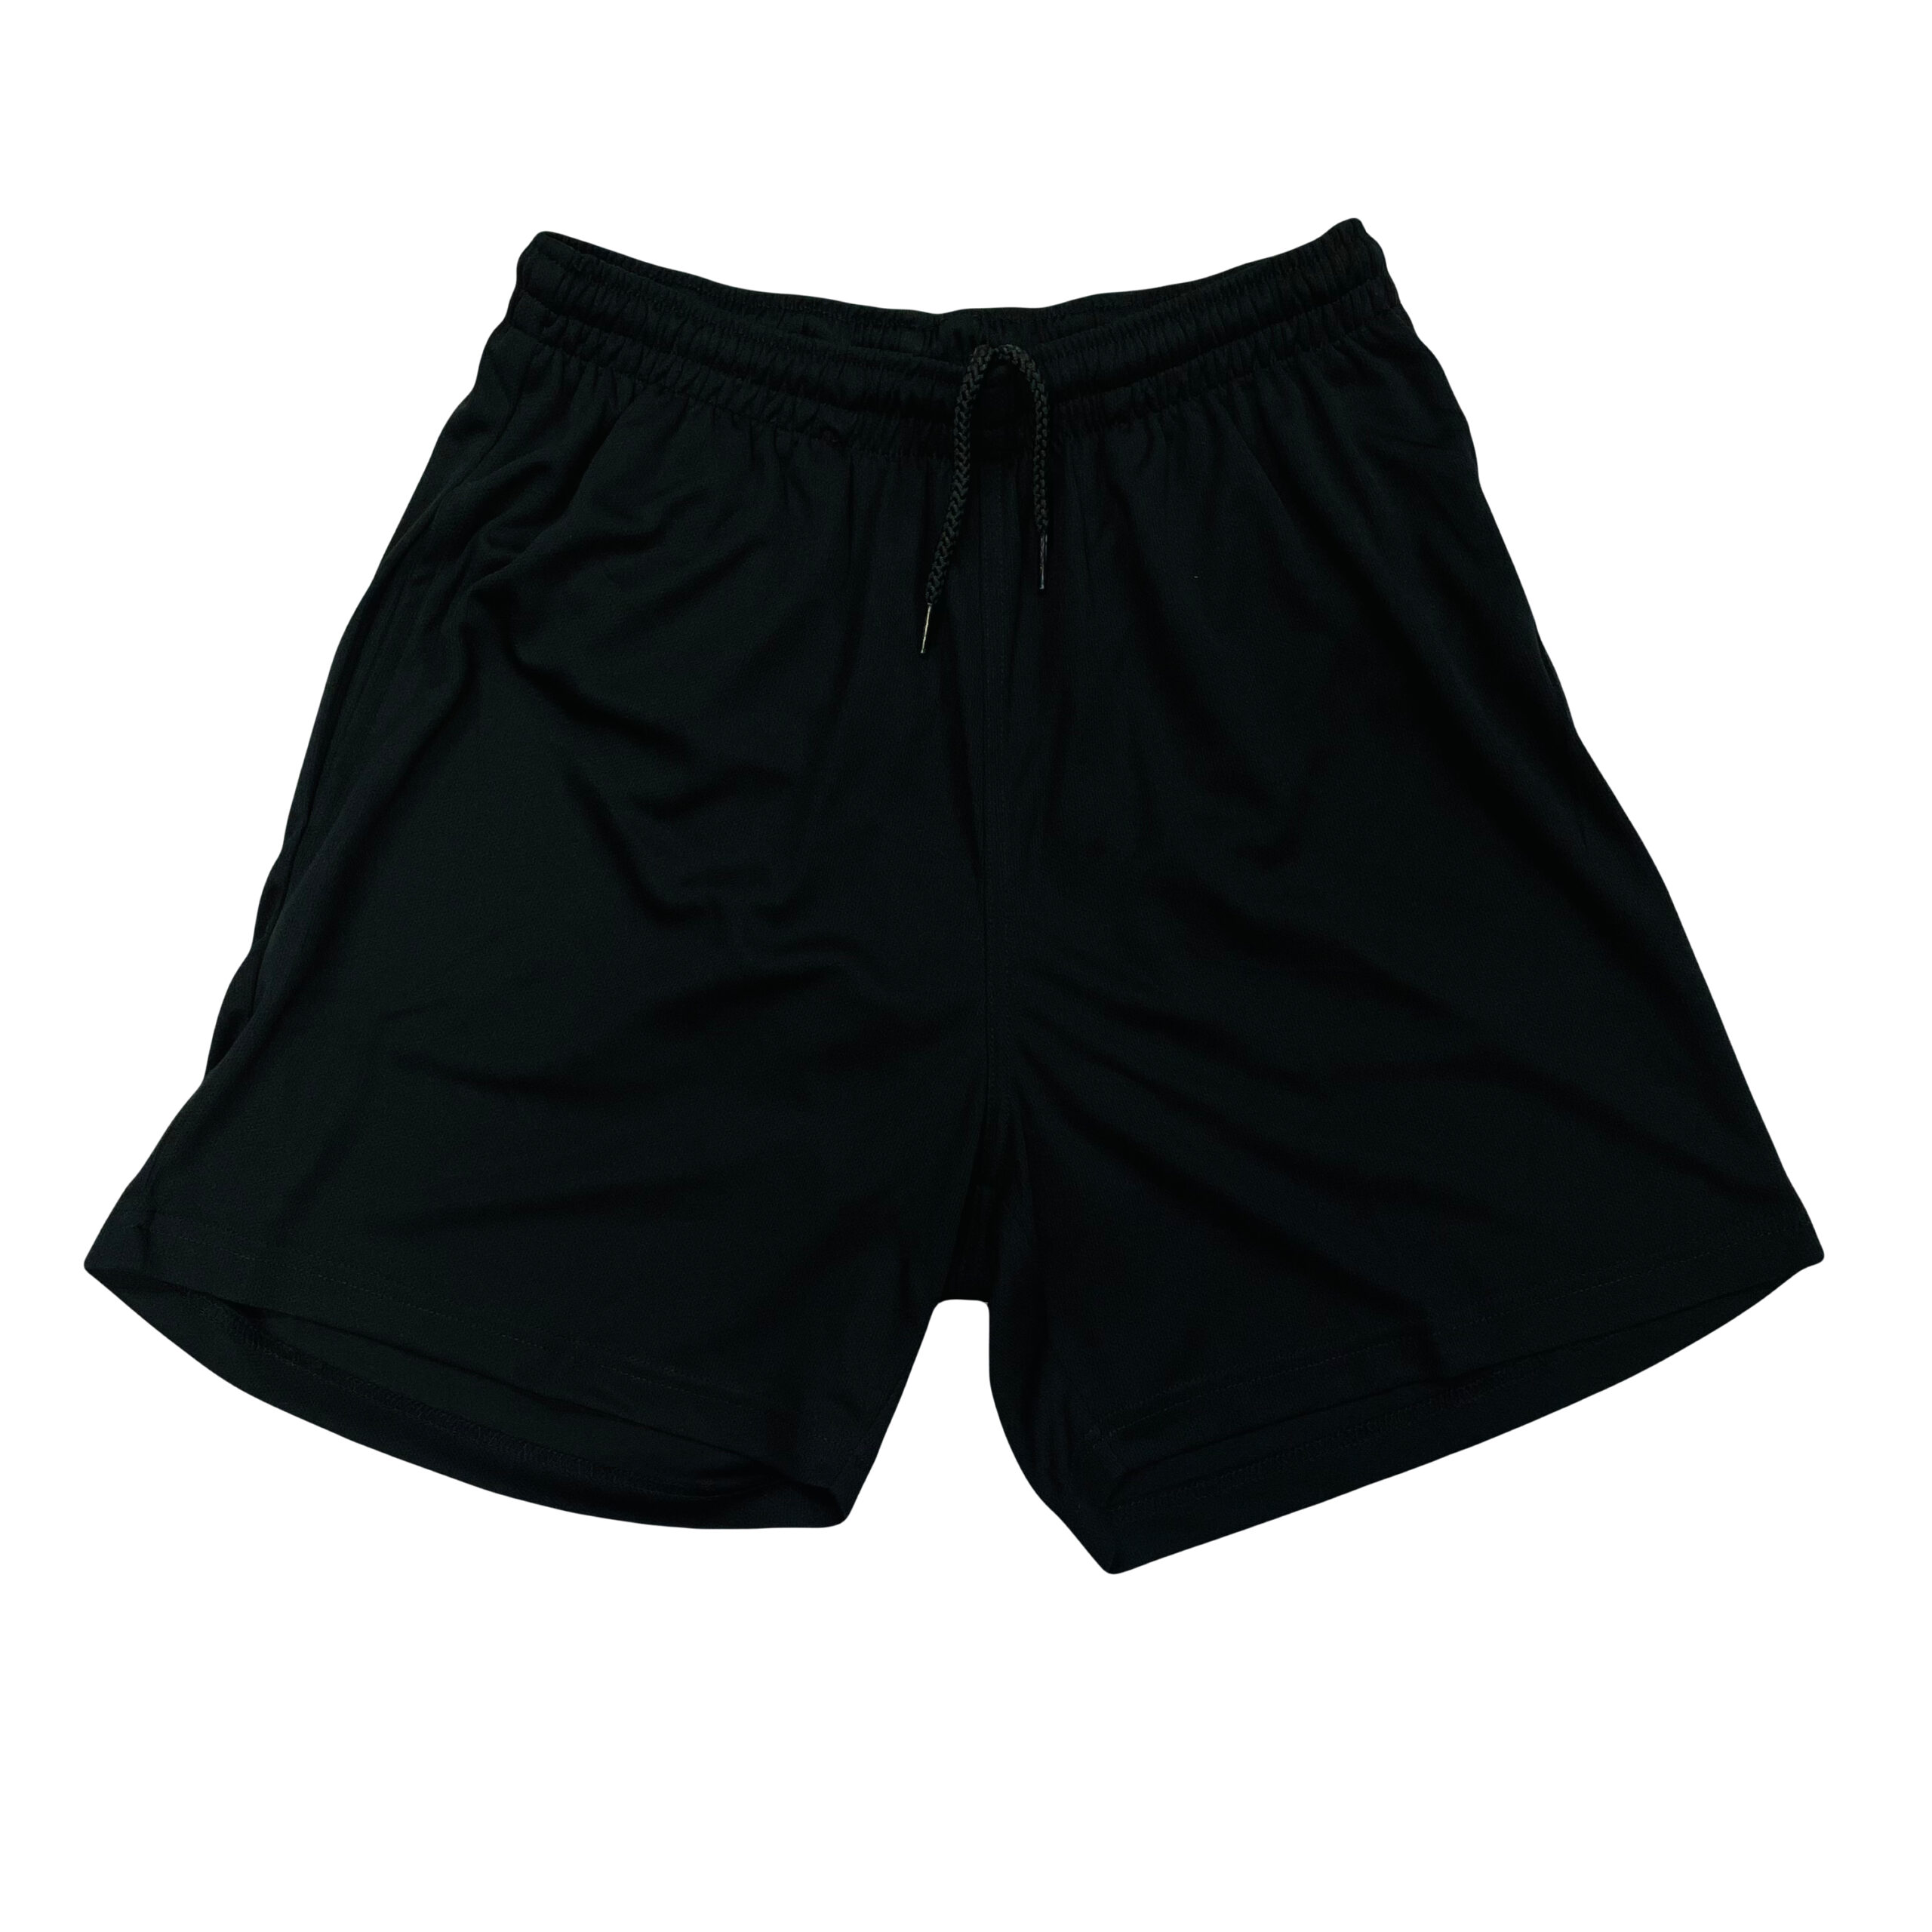 The Whitstable School PE Shorts